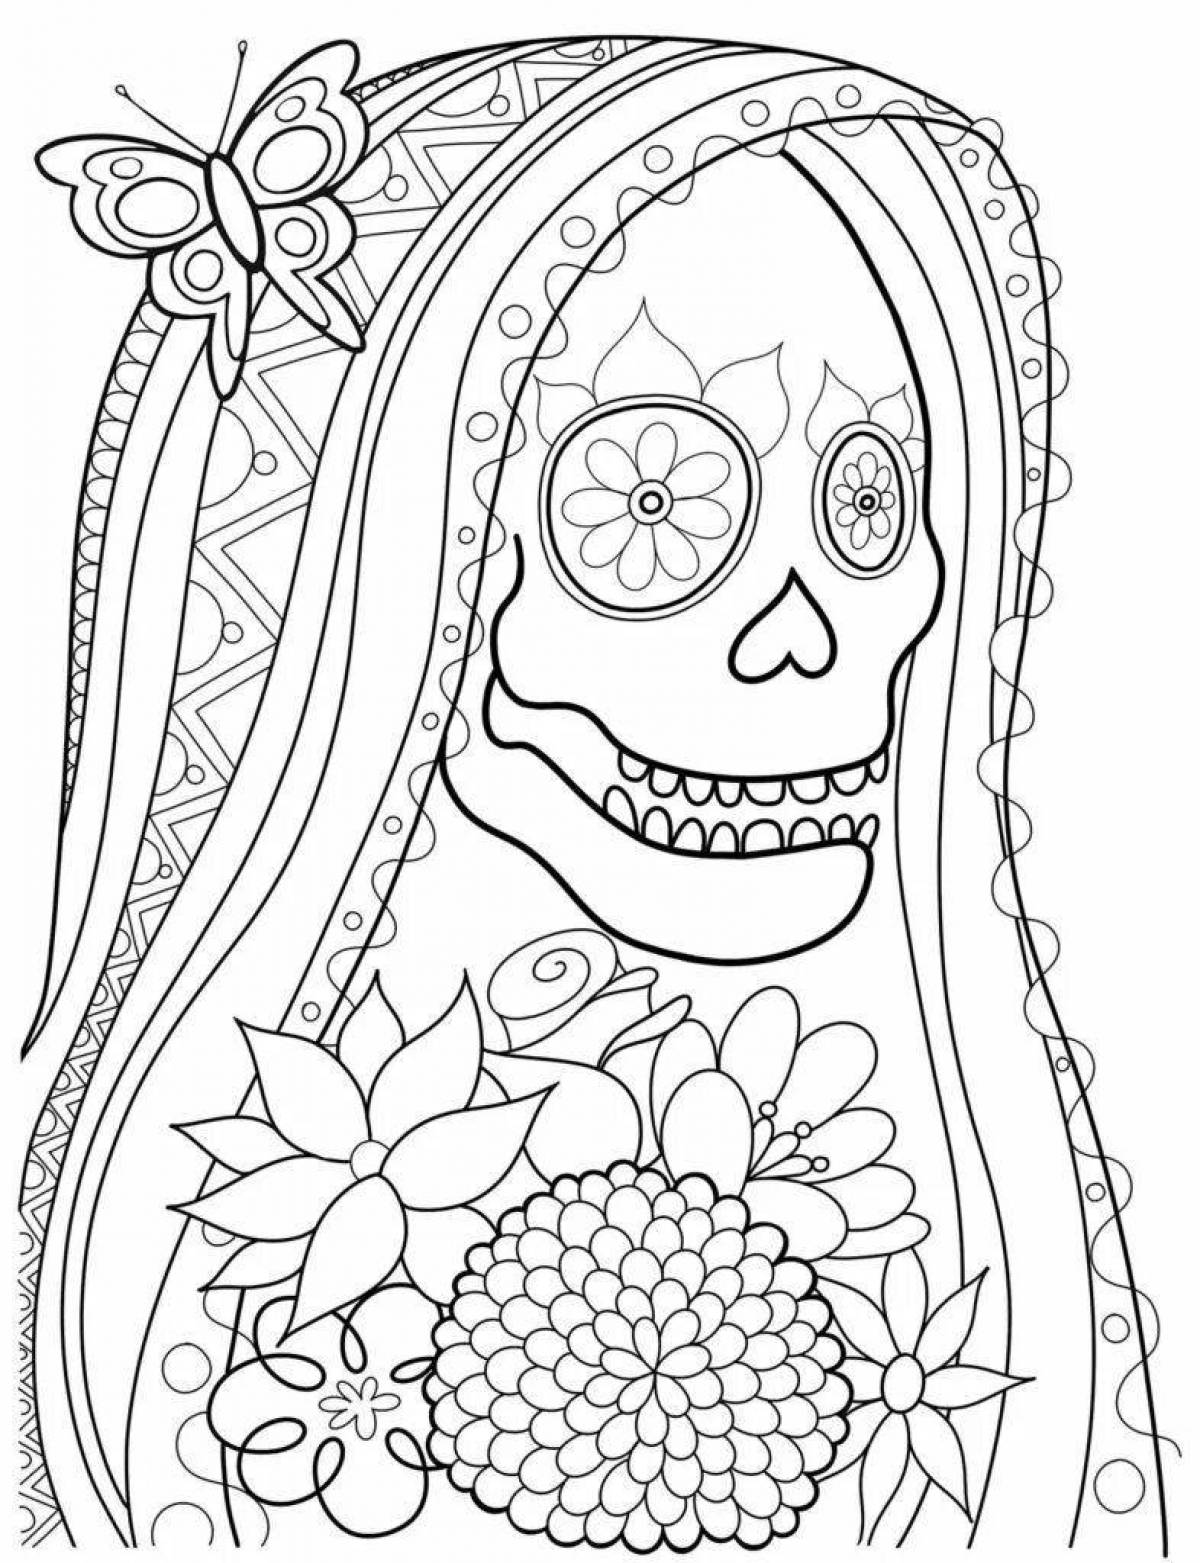 Nervous coloring book for girls